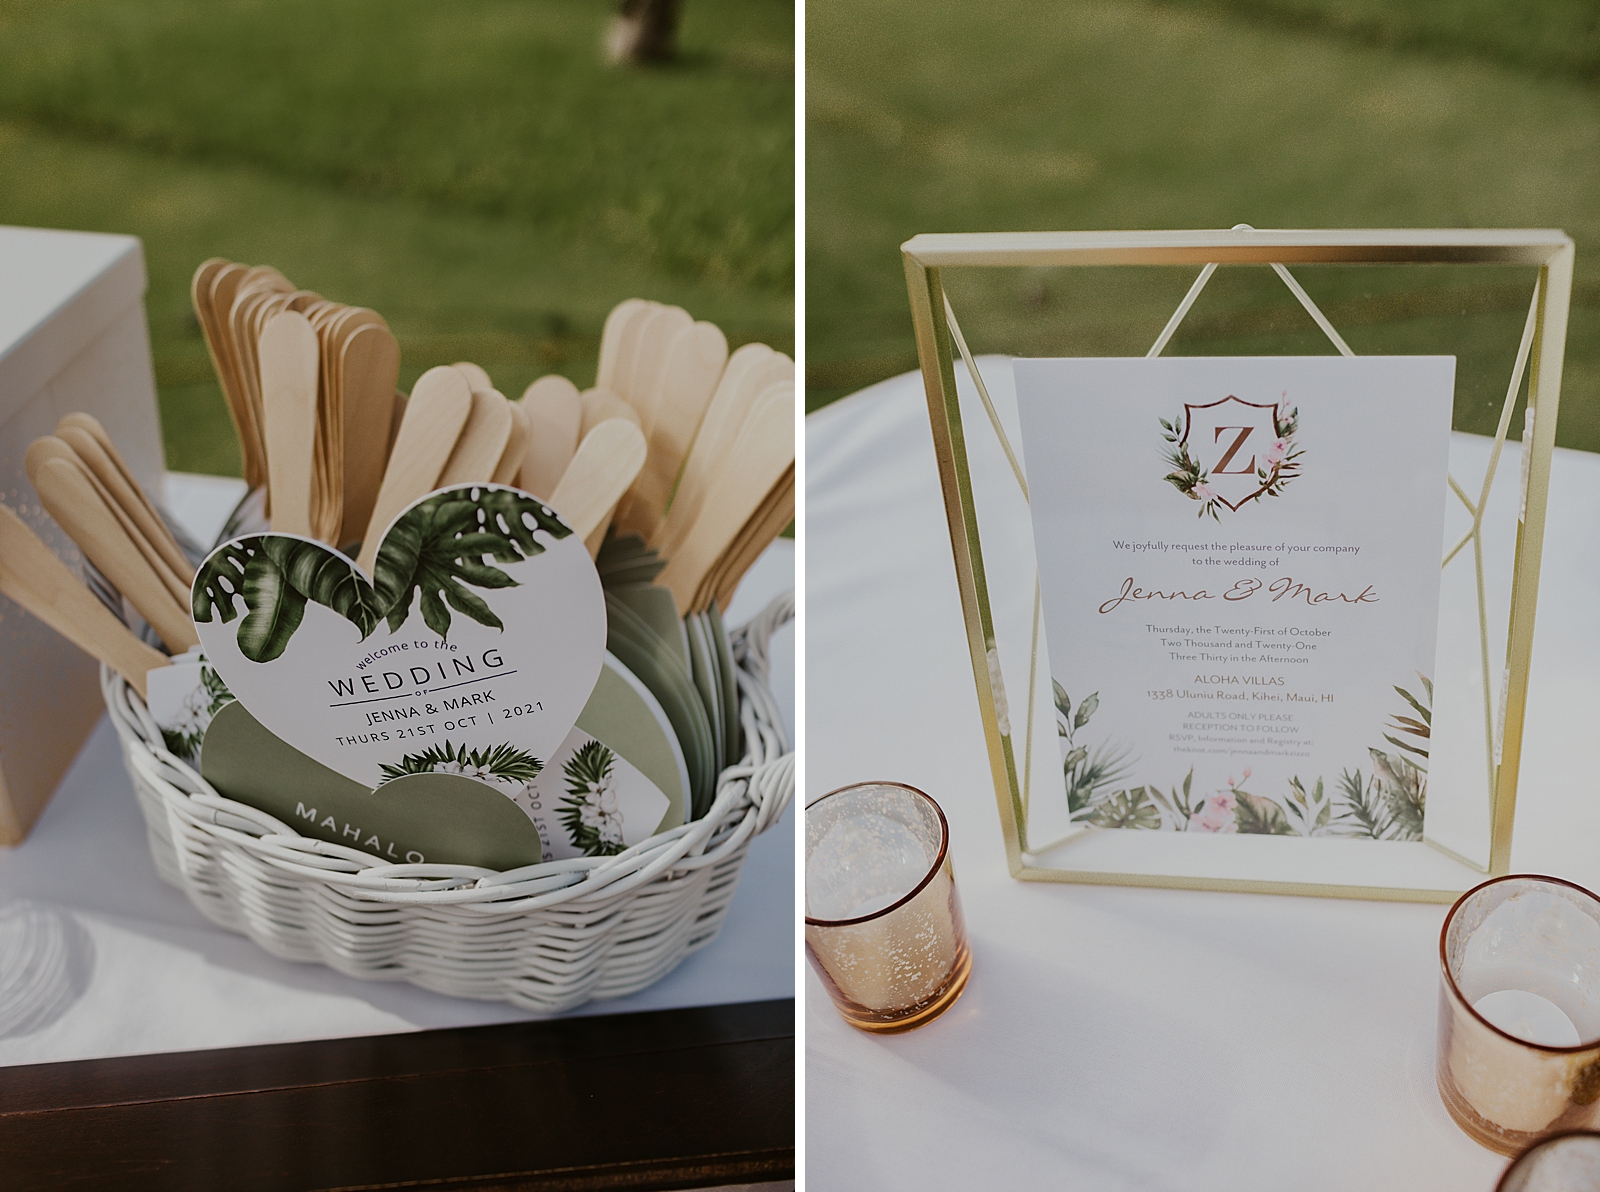 Detail shot of fans and welcome note for outdoor wedding